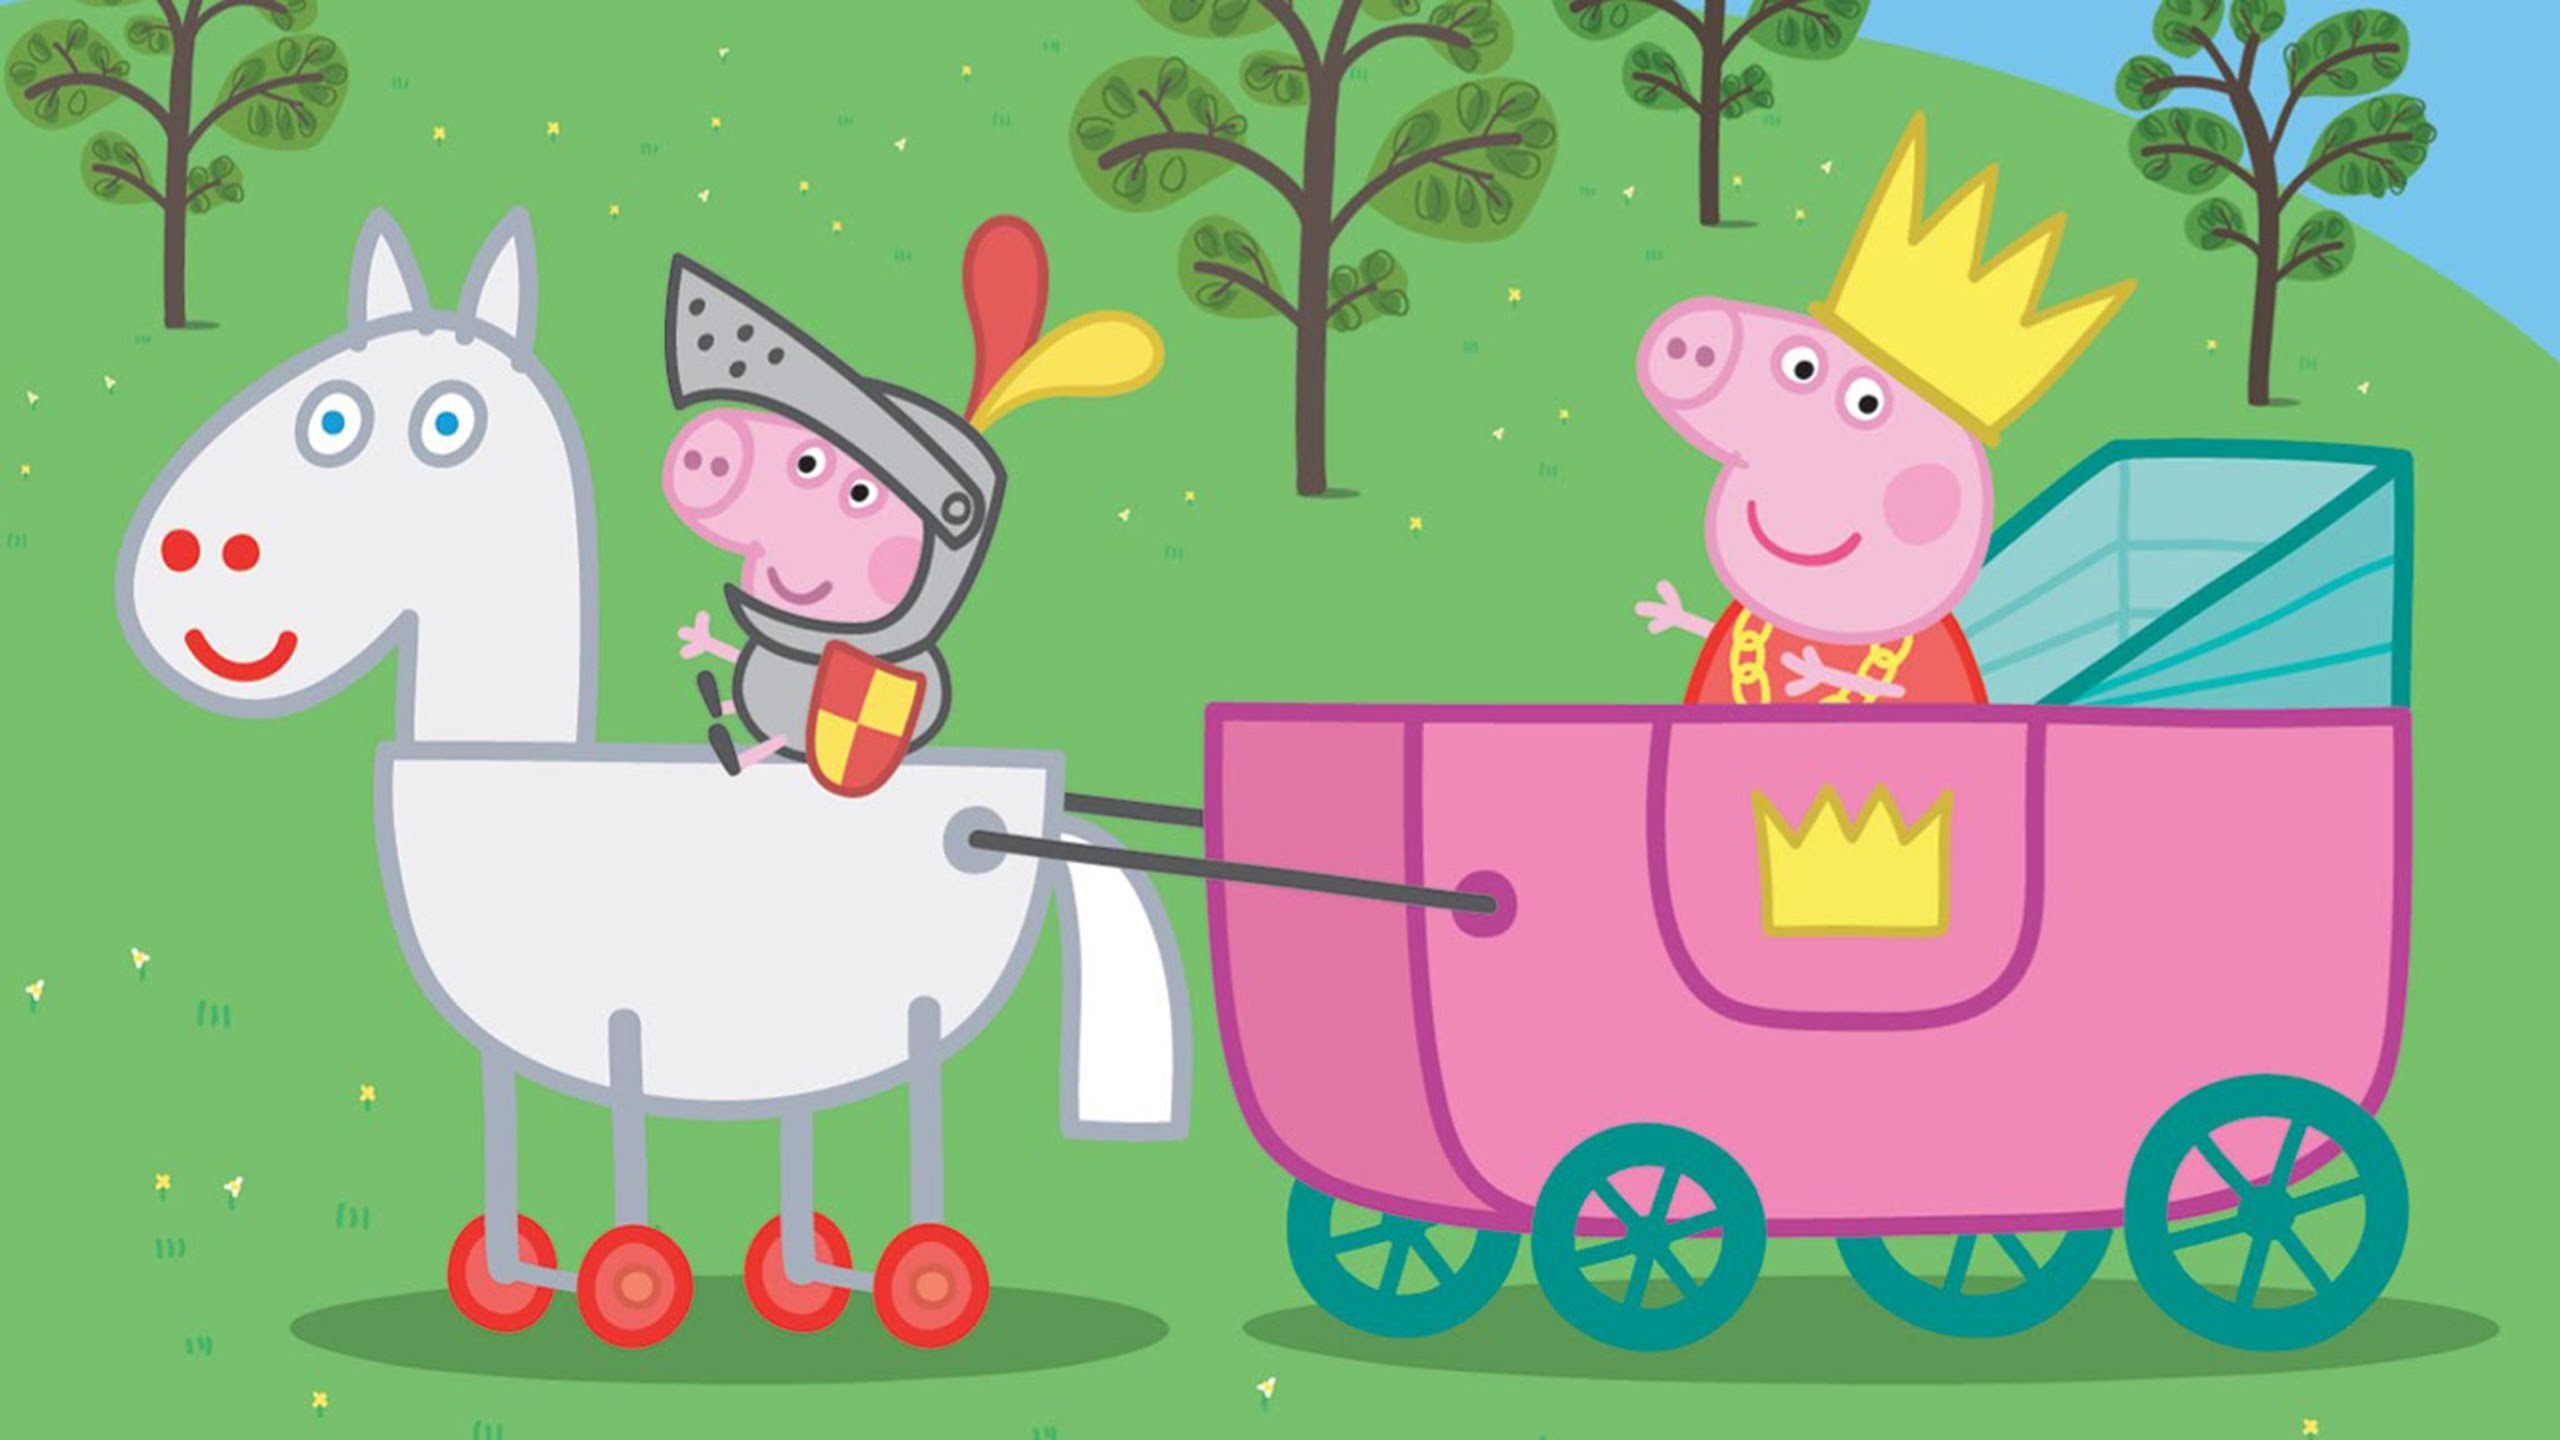 2560x1440 Peppa Pig Coloring Pages For Kids Peppa Pig Coloring Book -Princess Peppa  Pig Royal Carriage - YouTube